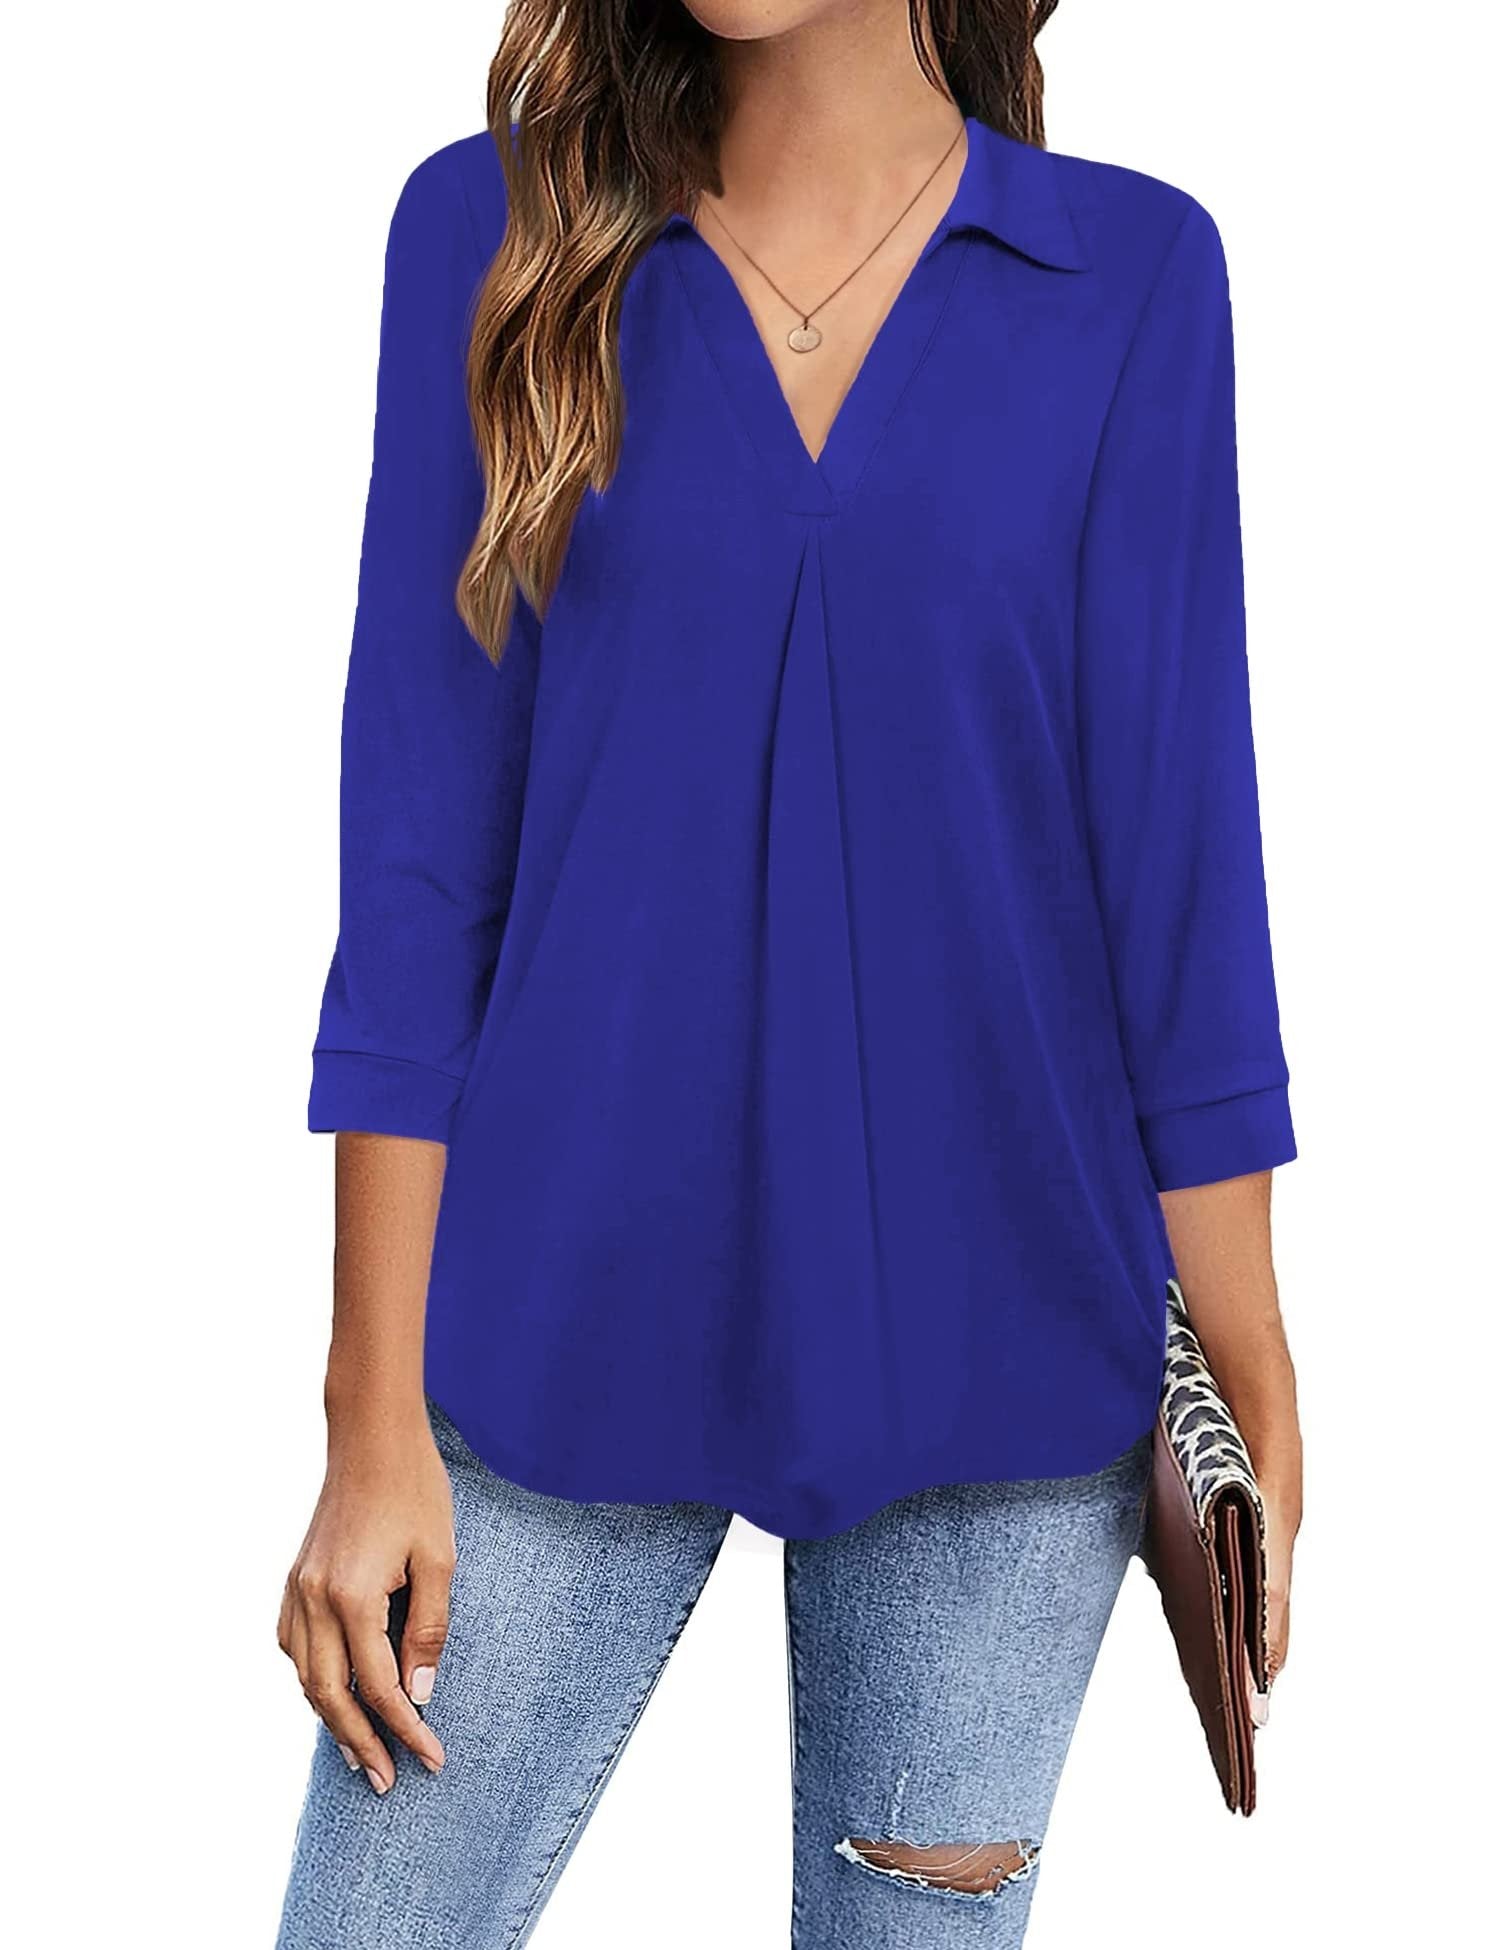 Blouses - Collared V Neck Casual Loose Blouse - MsDressly